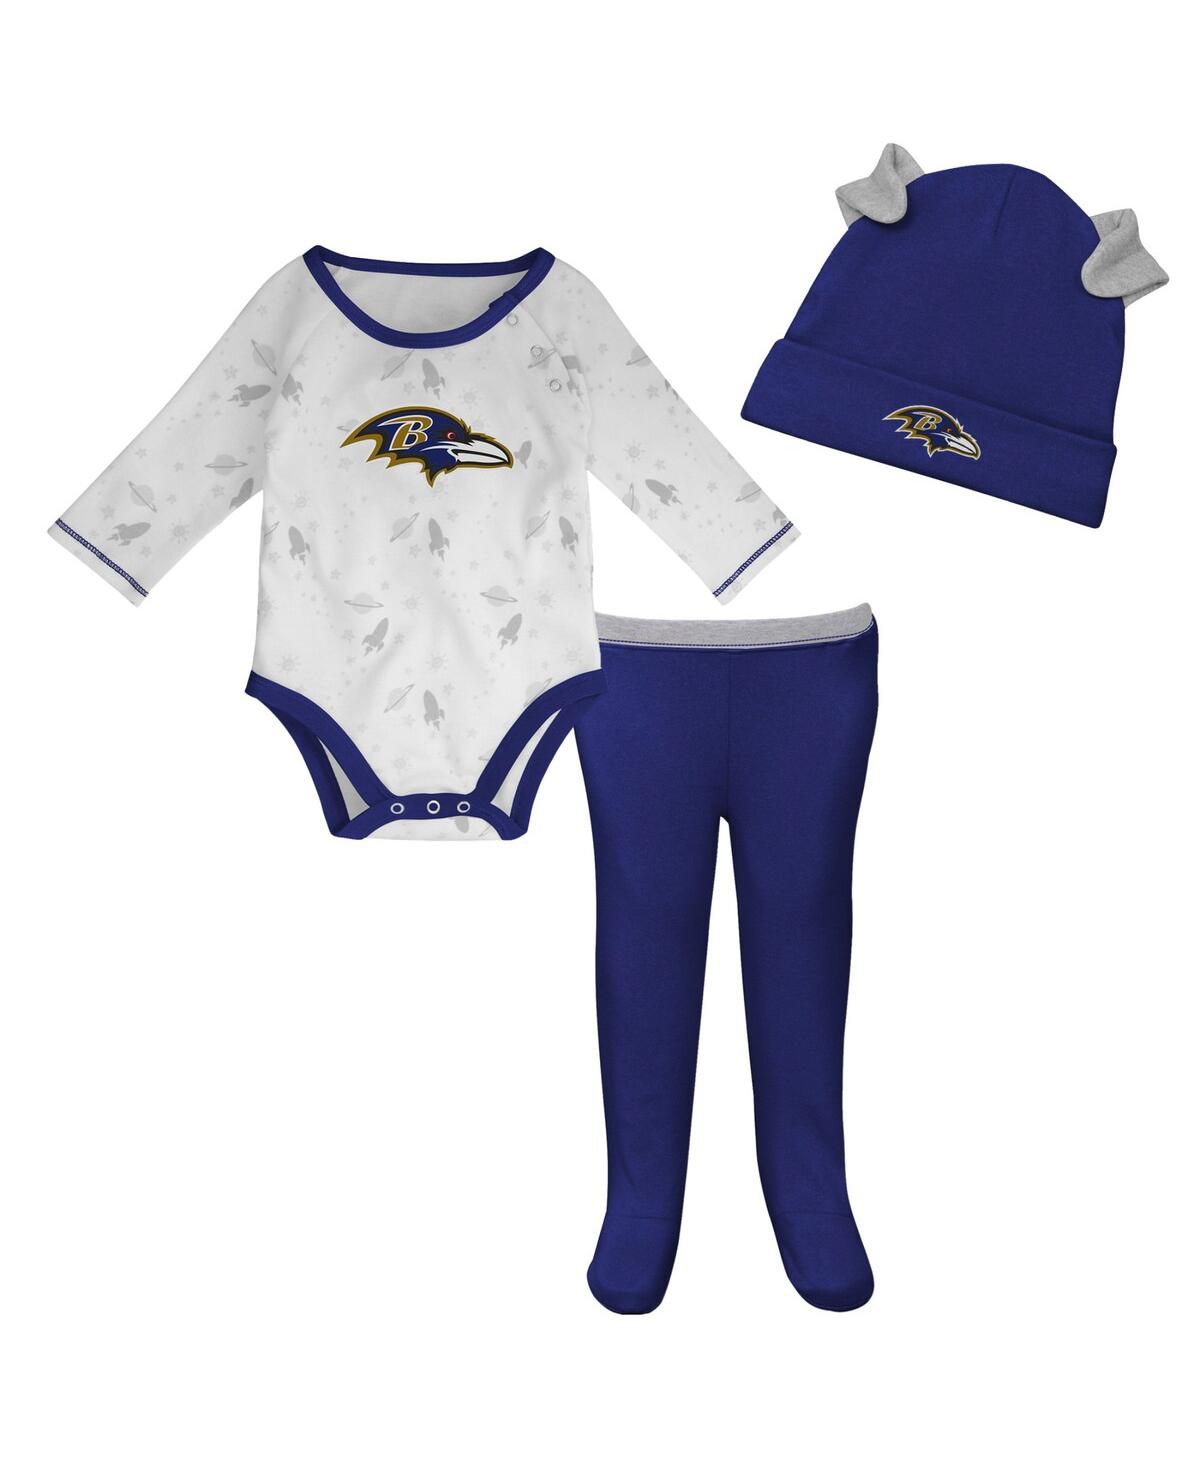 OUTERSTUFF NEWBORN AND INFANT BOYS AND GIRLS WHITE, PURPLE BALTIMORE RAVENS DREAM TEAM ONESIE PANTS AND HAT SET